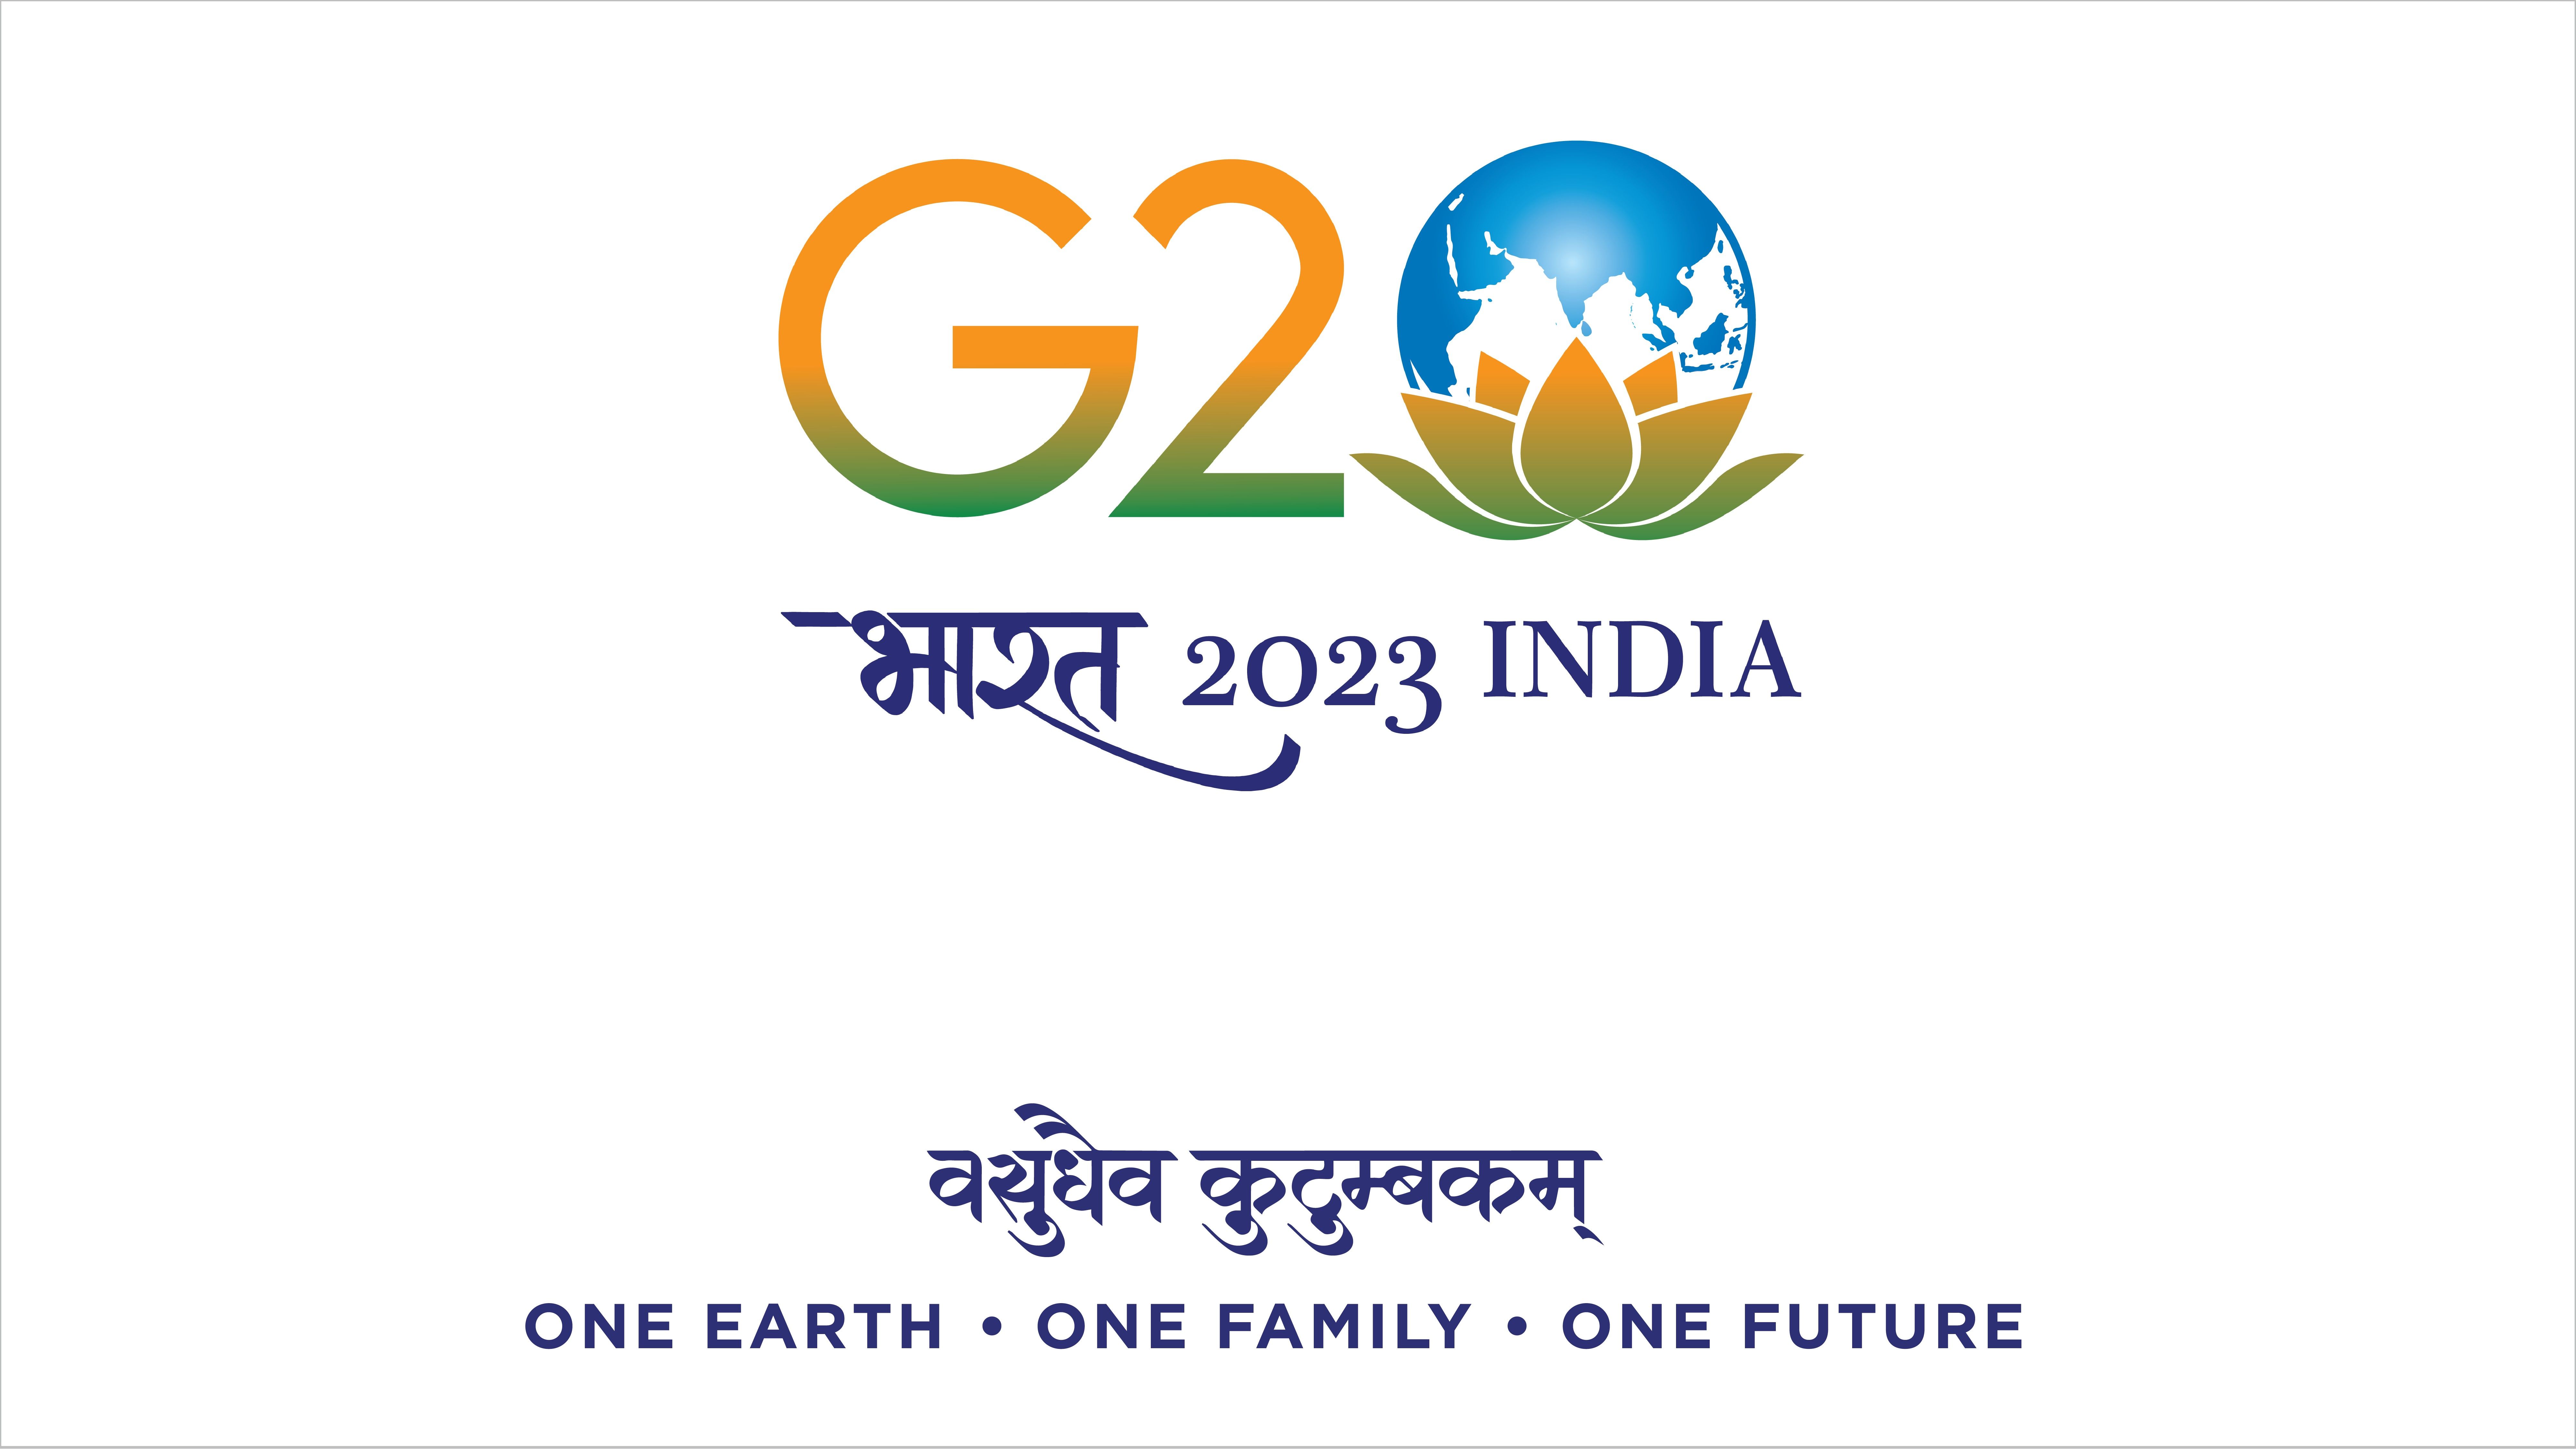 G20 Summit ends as PM Modi calls for reform in all global institutions

